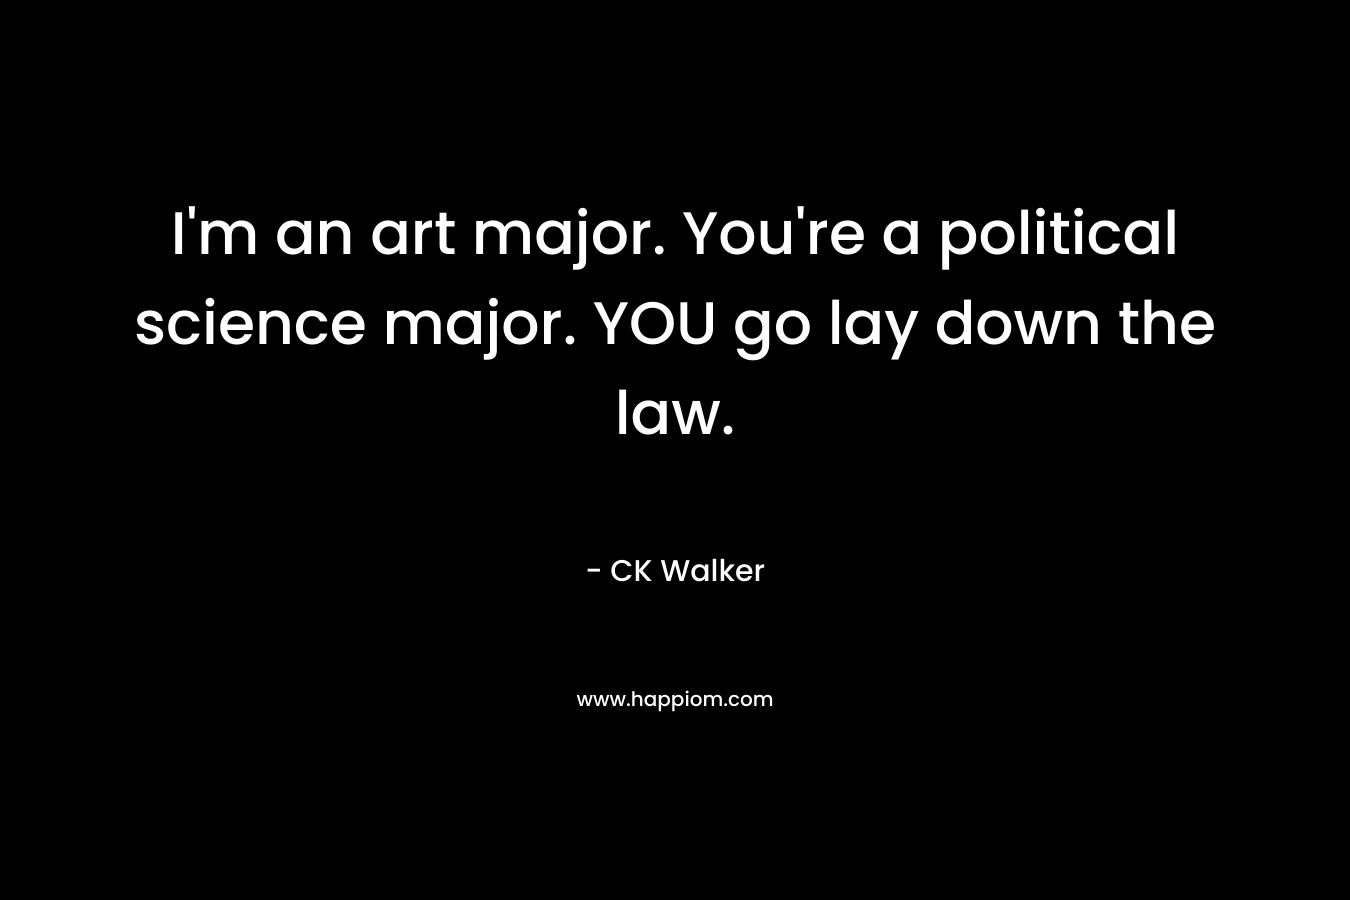 I'm an art major. You're a political science major. YOU go lay down the law.